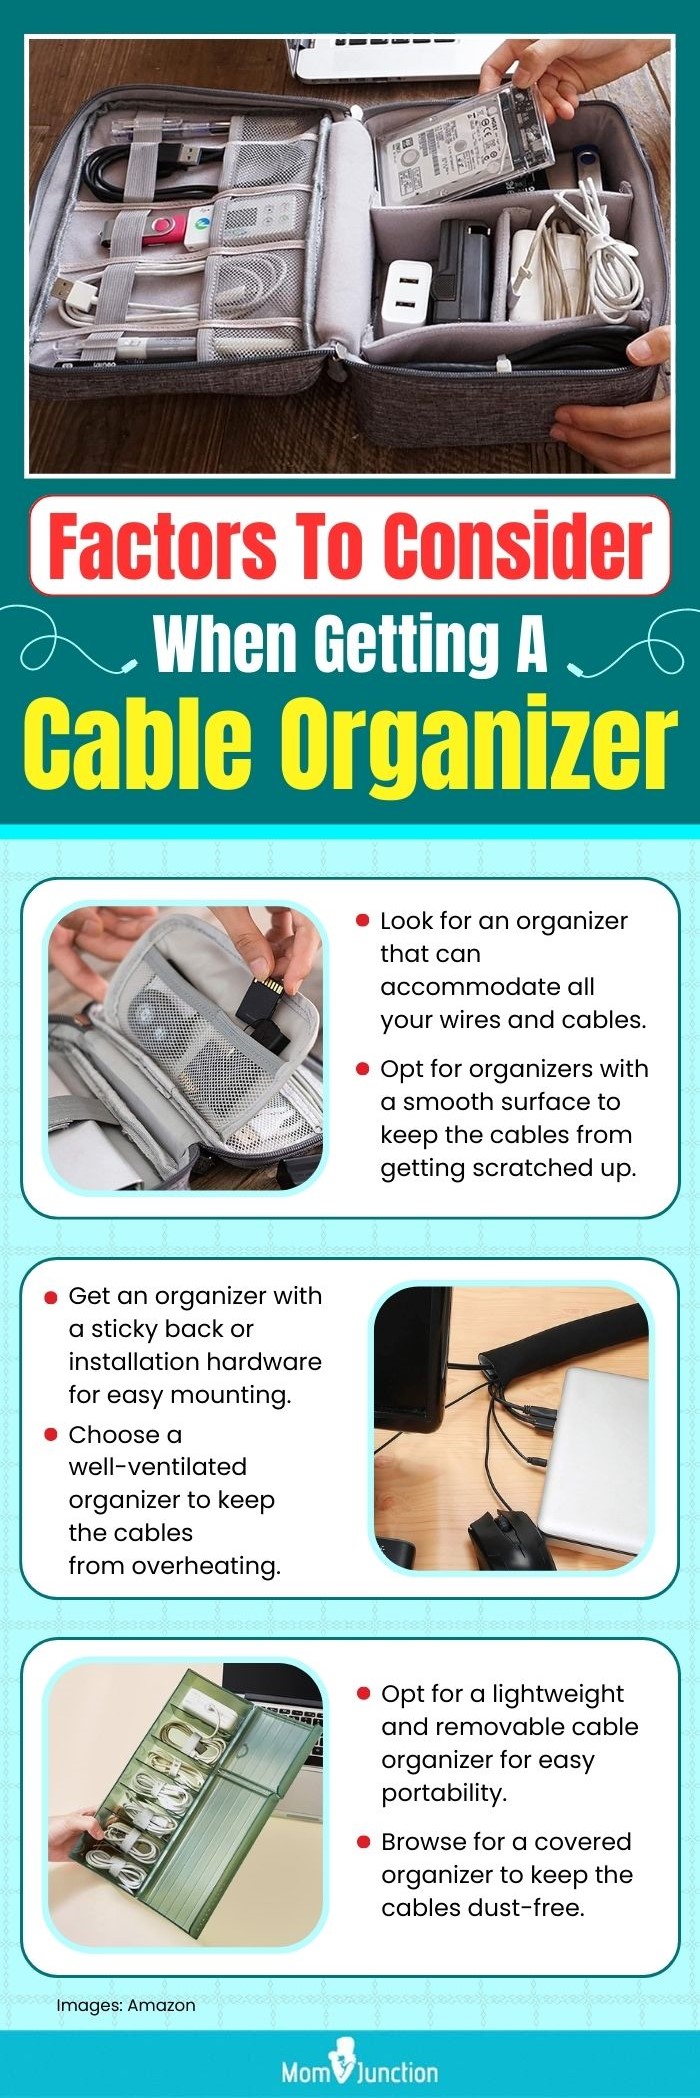 Yecaye Cable Management Cord Hider Box White 